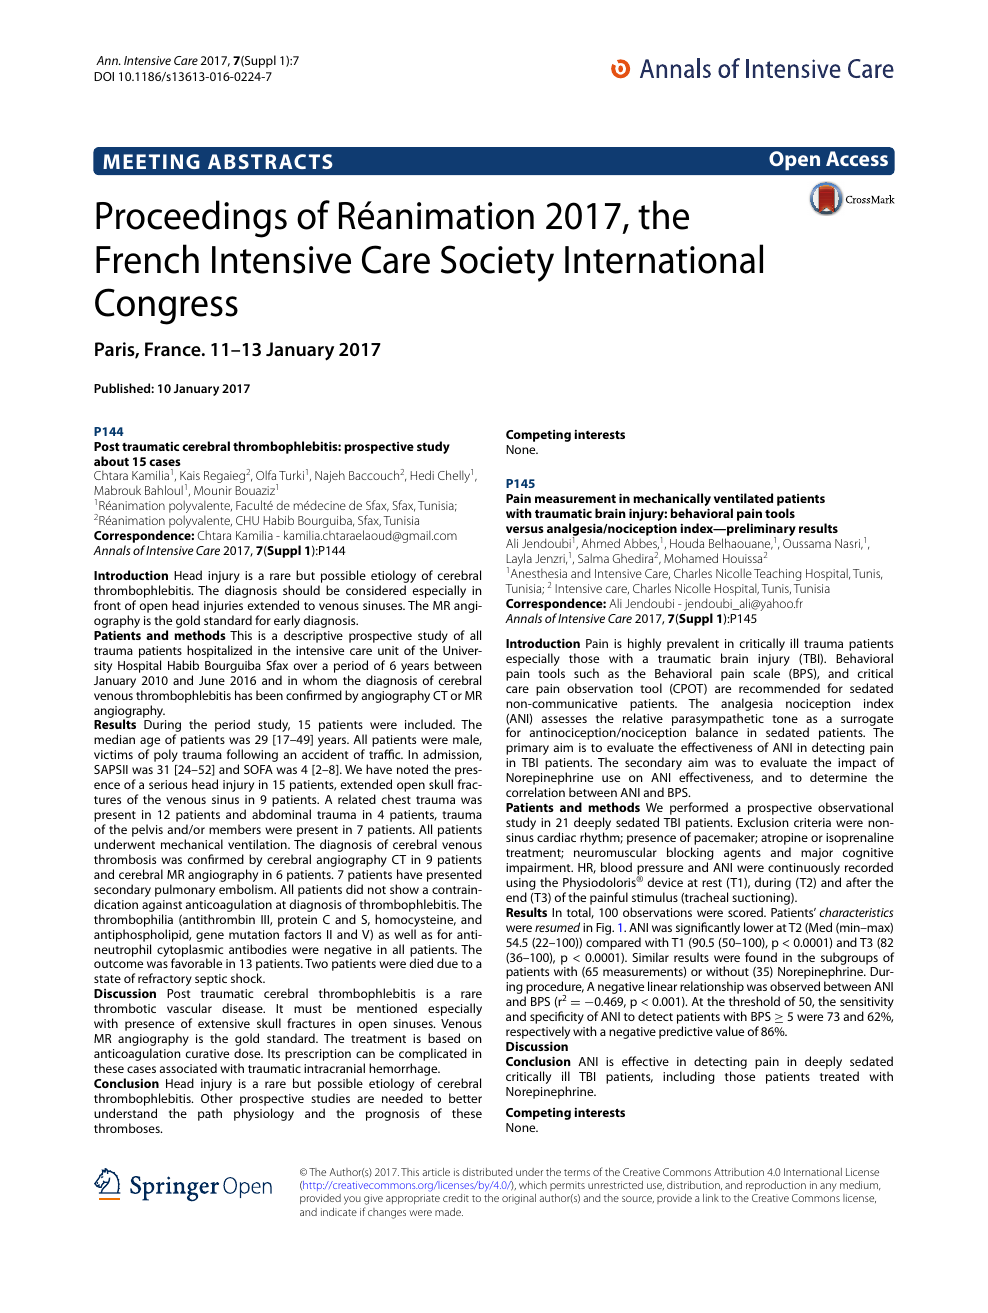 Proceedings Of Reanimation 2017 The French Intensive Care Society